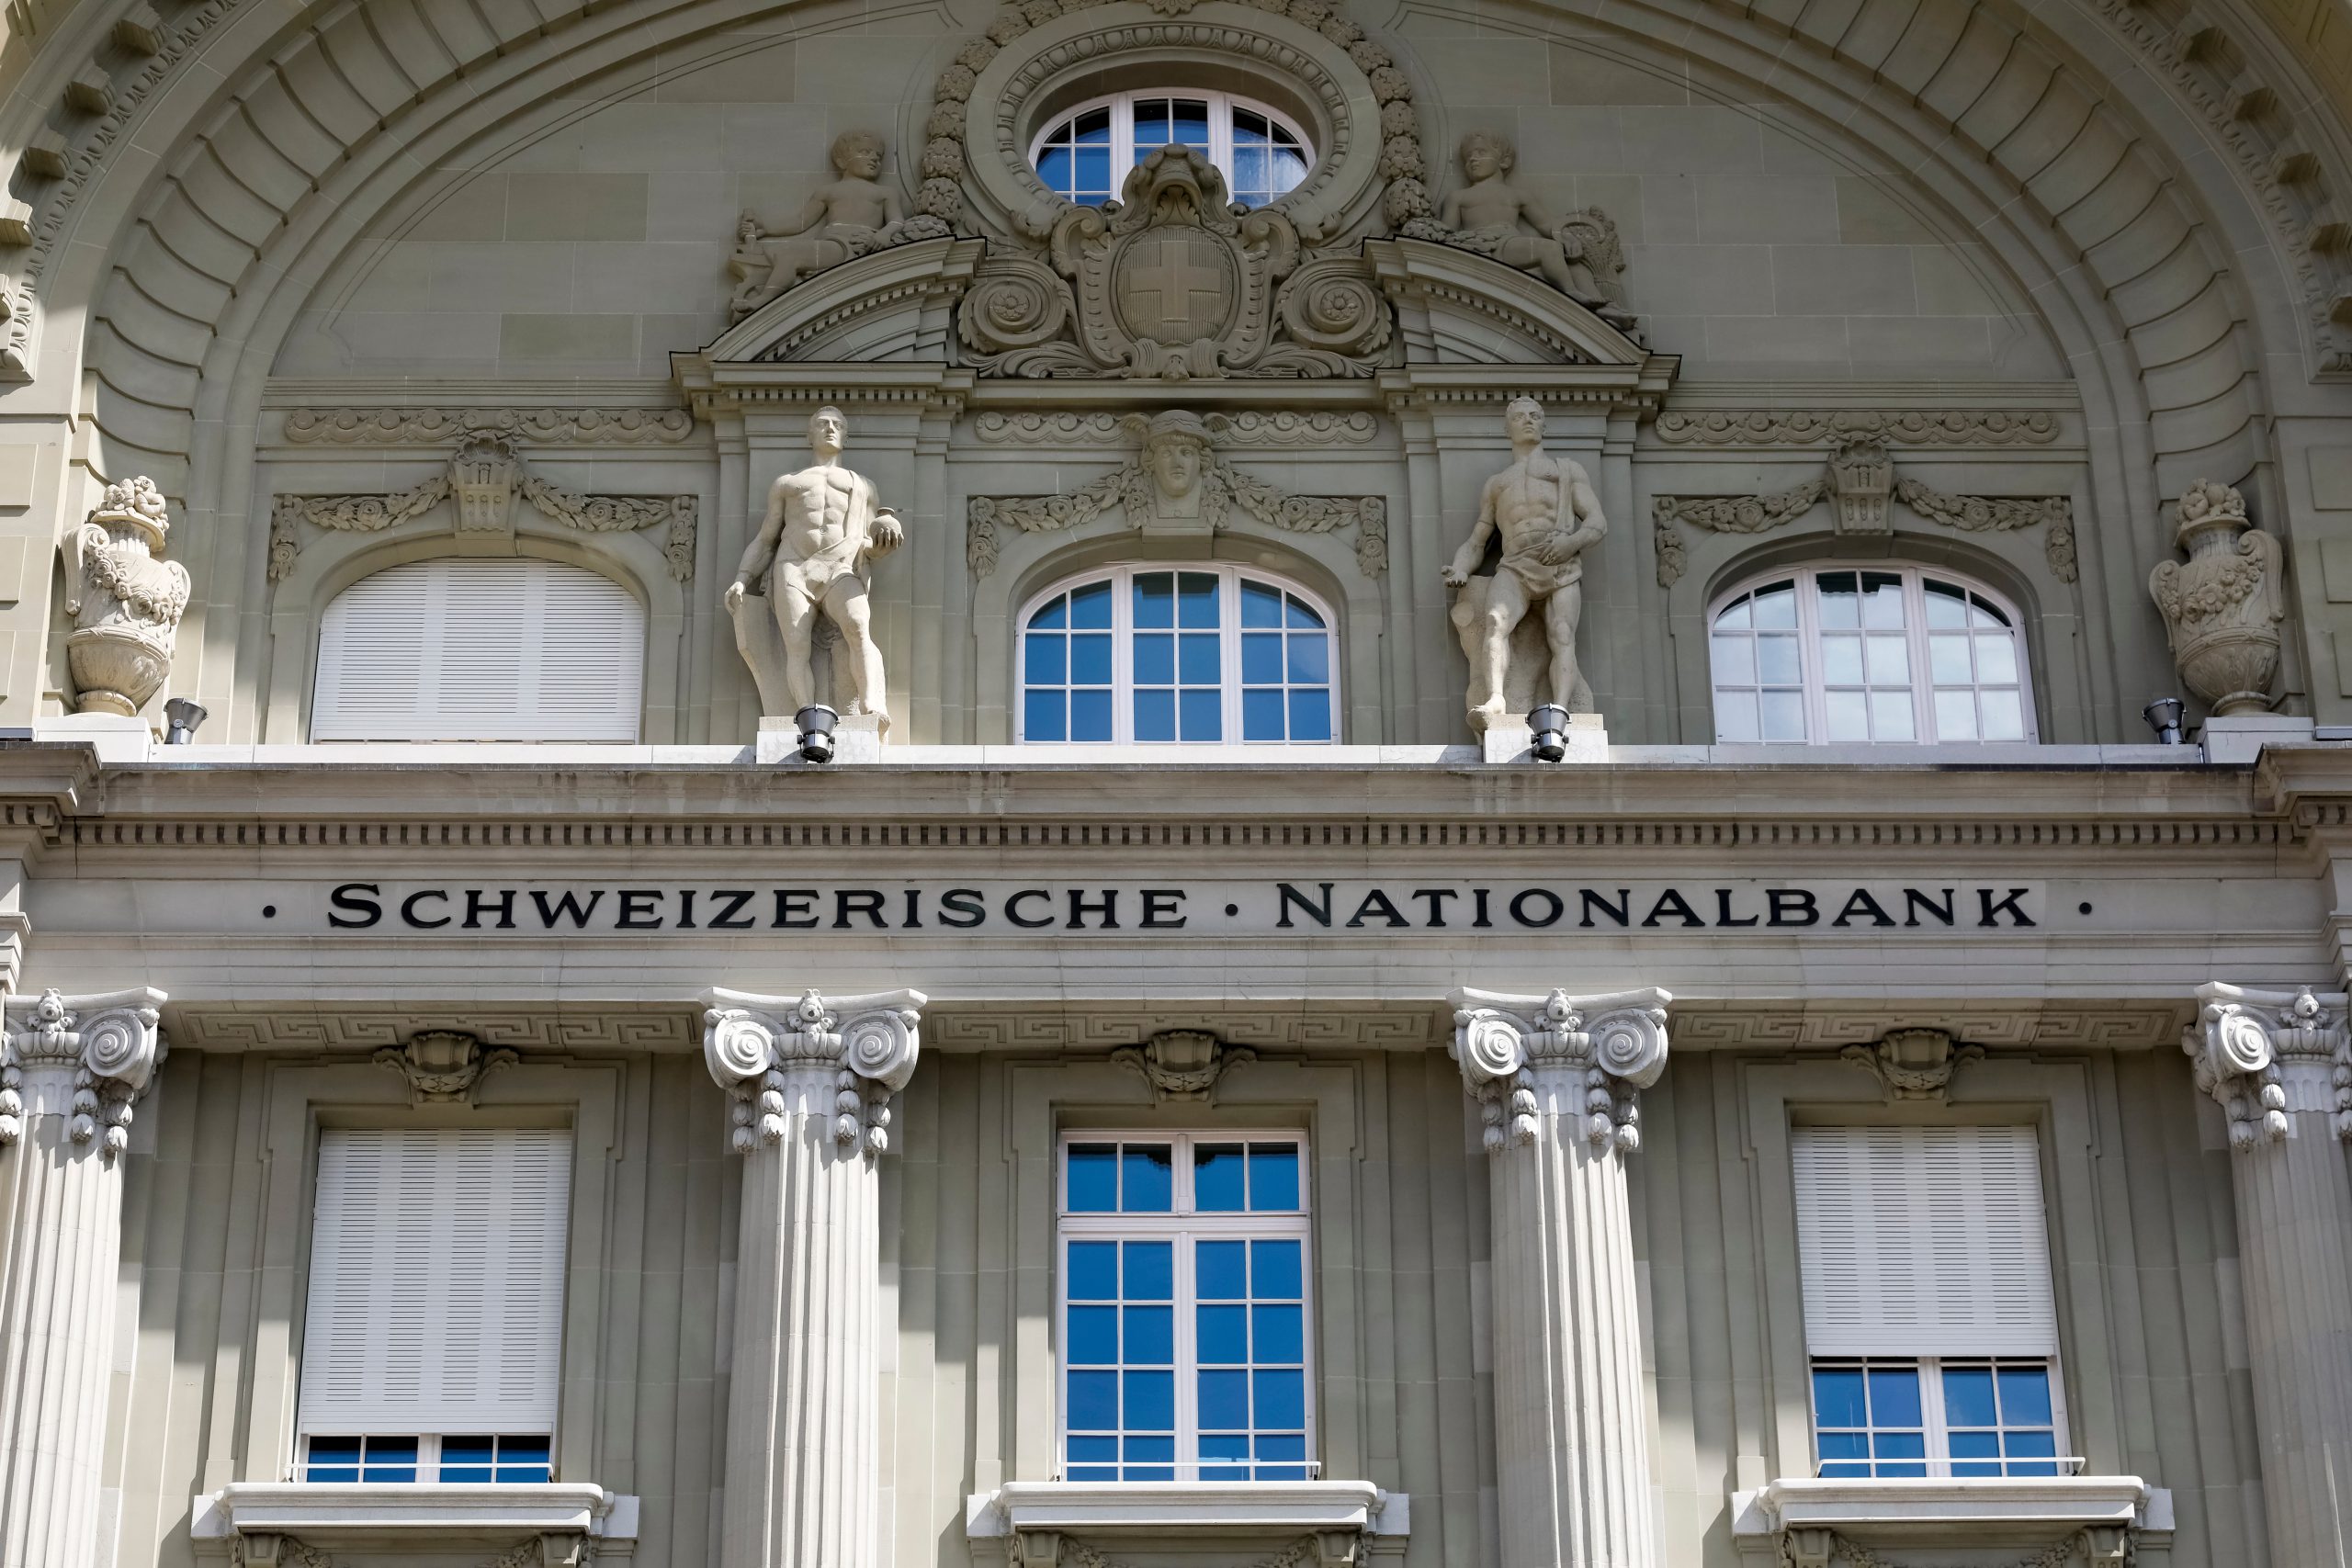 The Swiss National Bank reports a profit of CHF 20.9 billion for 2020 (2019: CHF 48.9 billion).